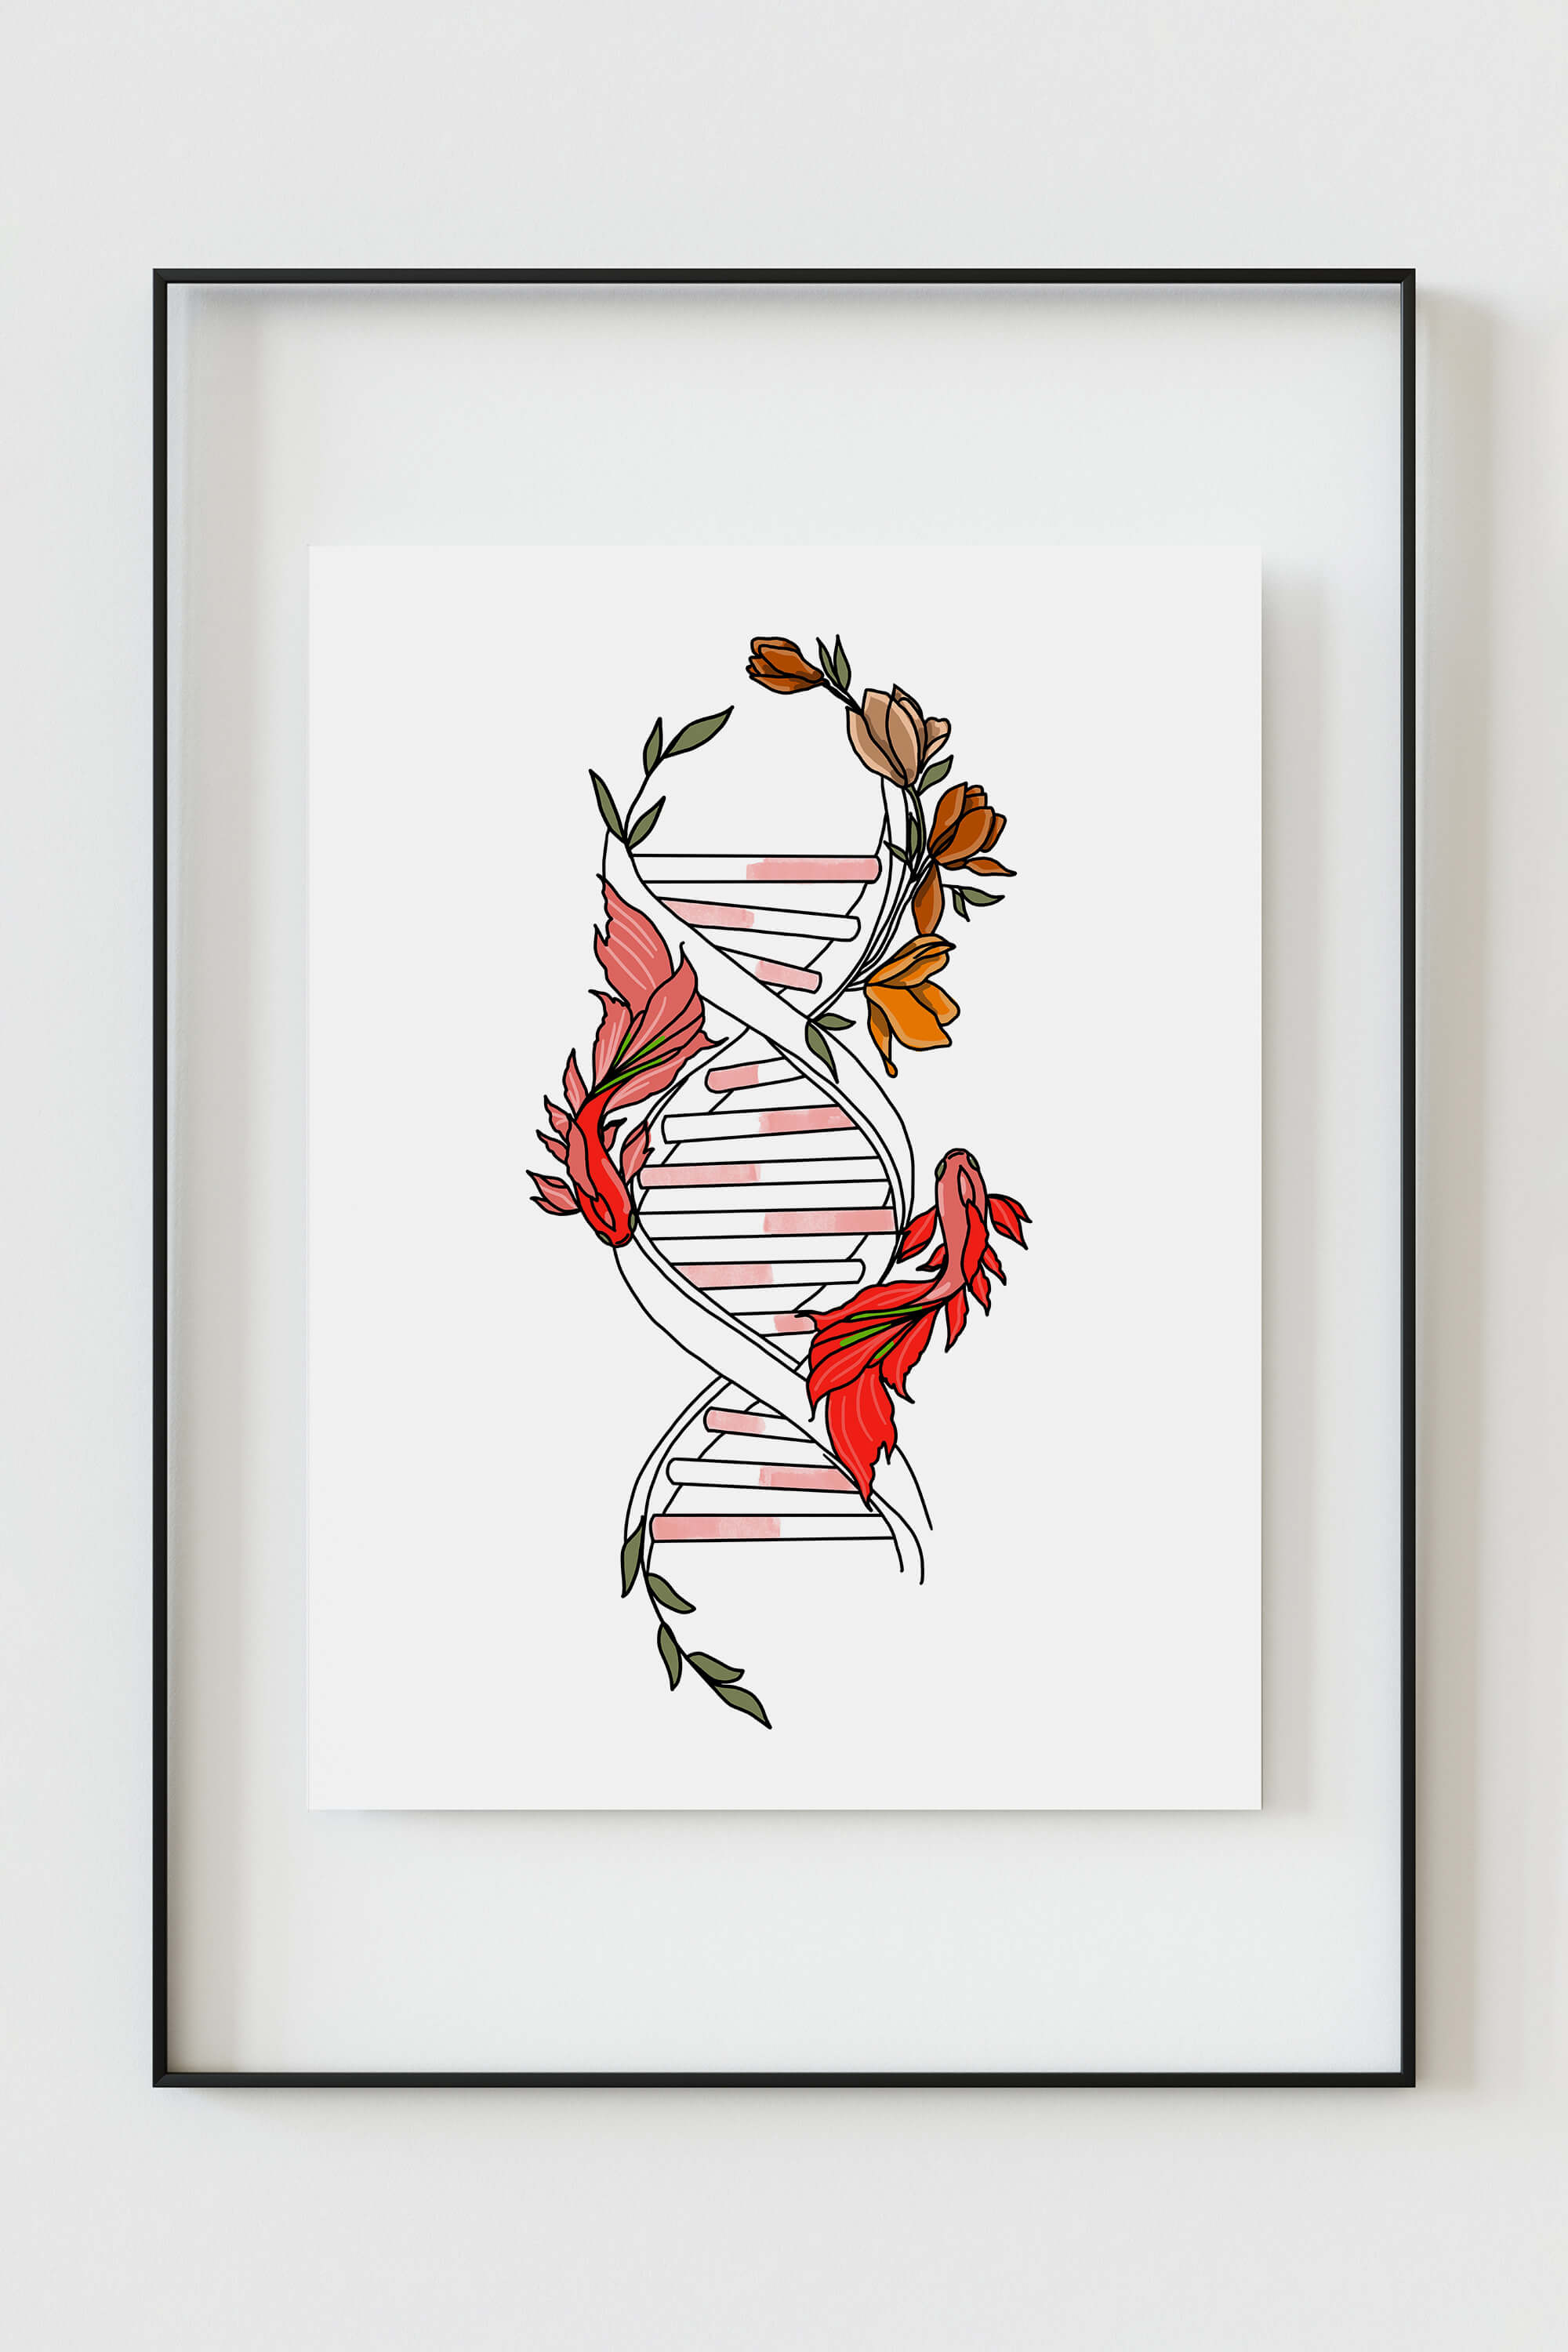 Elegant Science Room Wall Art showcasing a DNA strand with floral patterns for an educational setting.